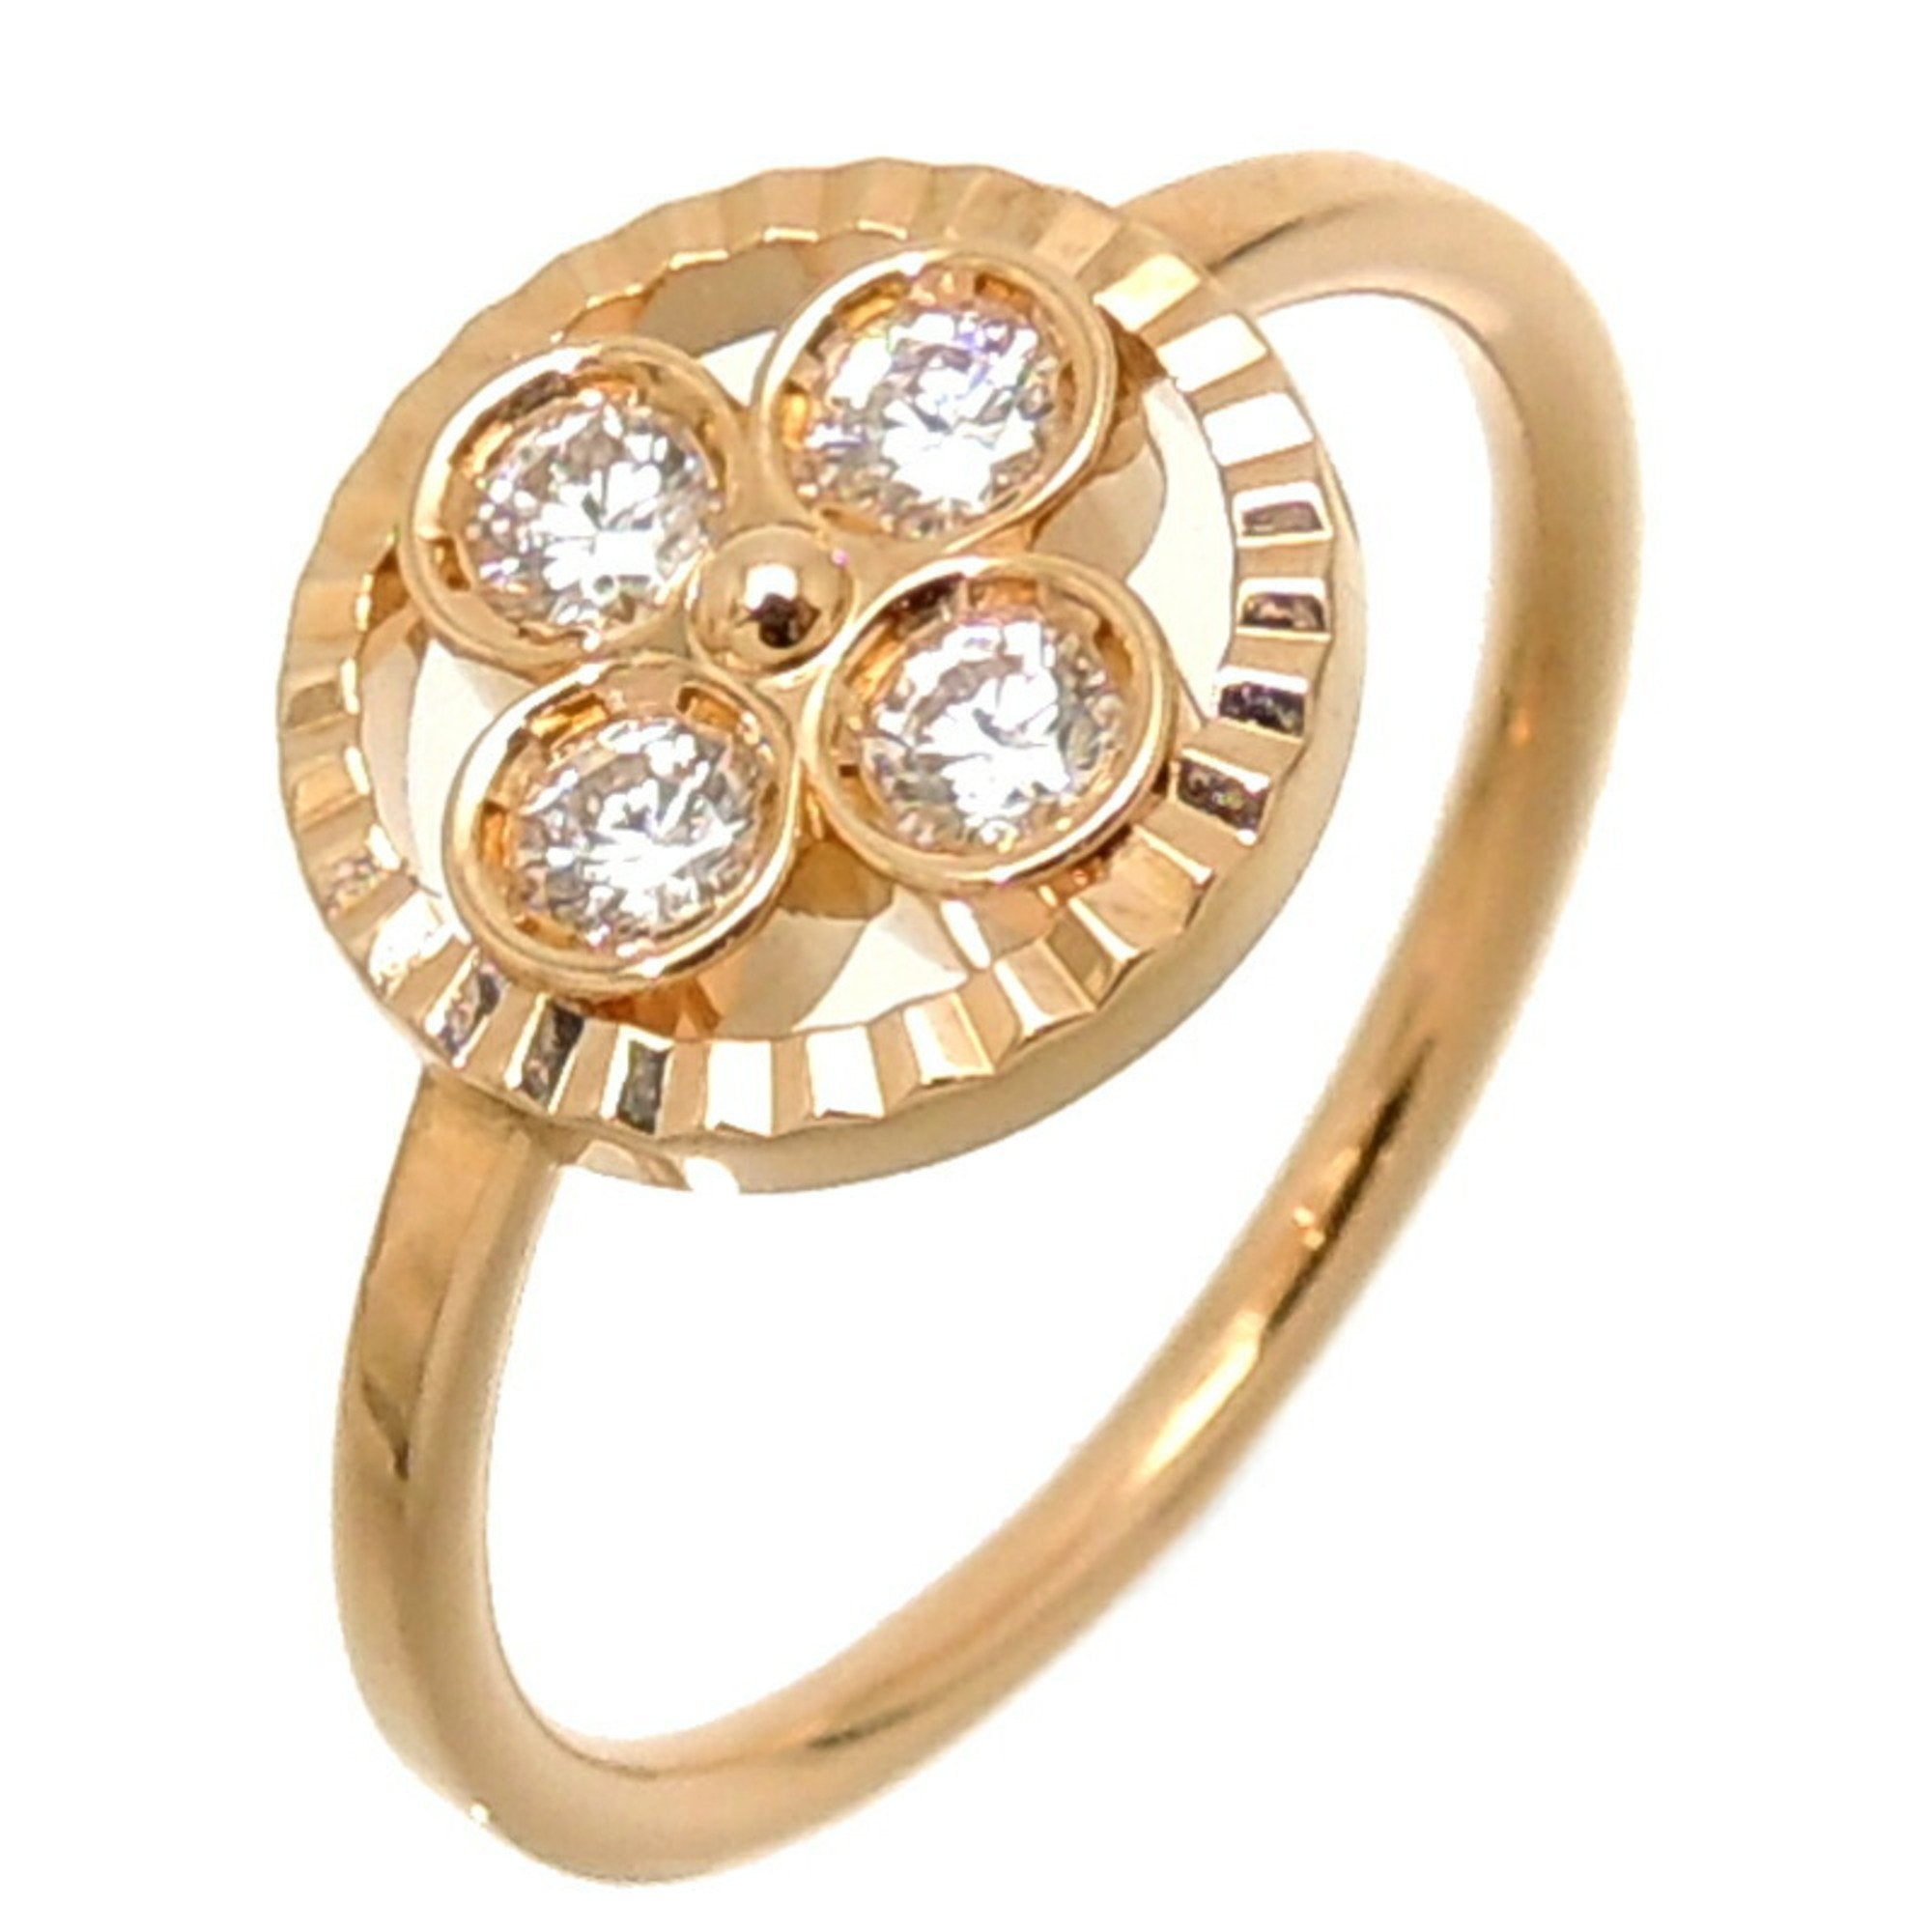 Louis Vuitton Blossom Ring, Pink Gold and Diamonds. Size 48